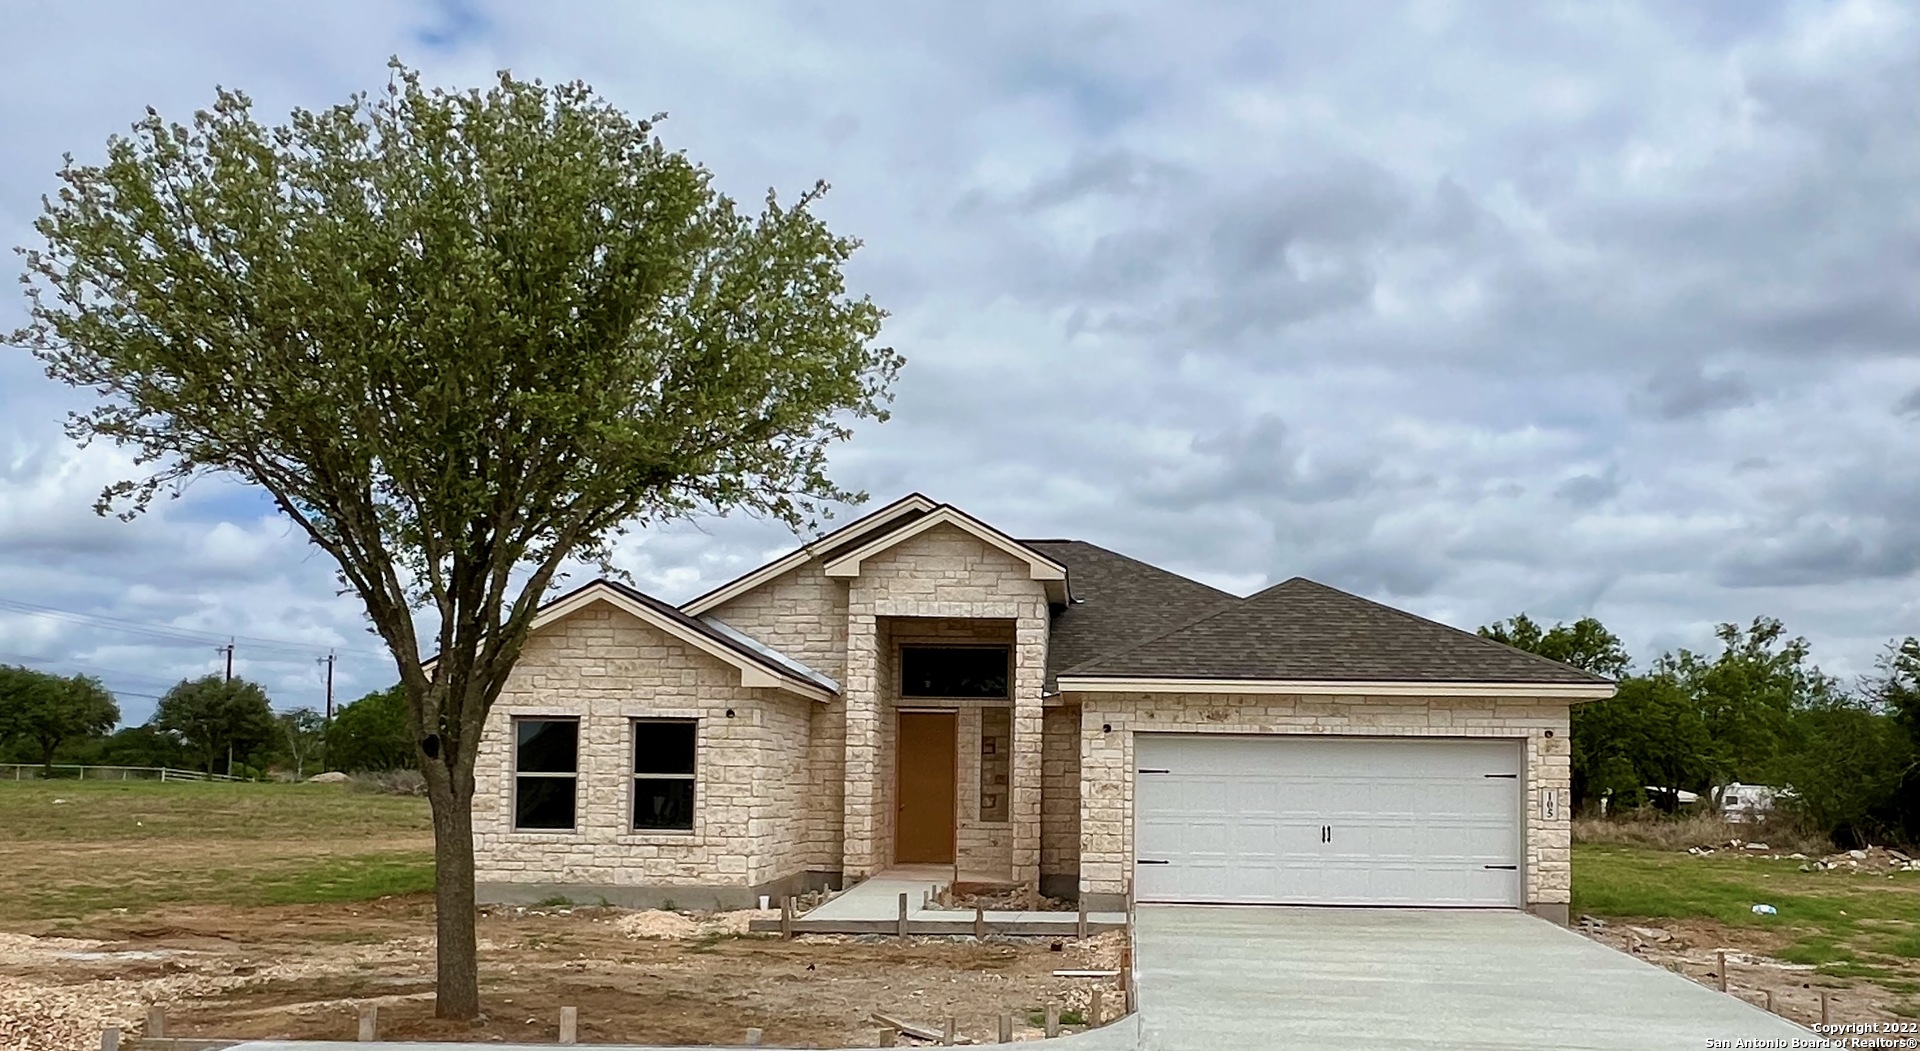 Beautiful New home in The Granberg on a .75 Ac.  This home has 3 Bedroom and 3 bathrooms with no steps and no carpet all tile. This home have high ceilings and abundant light. Master suite with large walk-in closet. Nicely sized kitchen with solid countertops & stainless steel appliances.